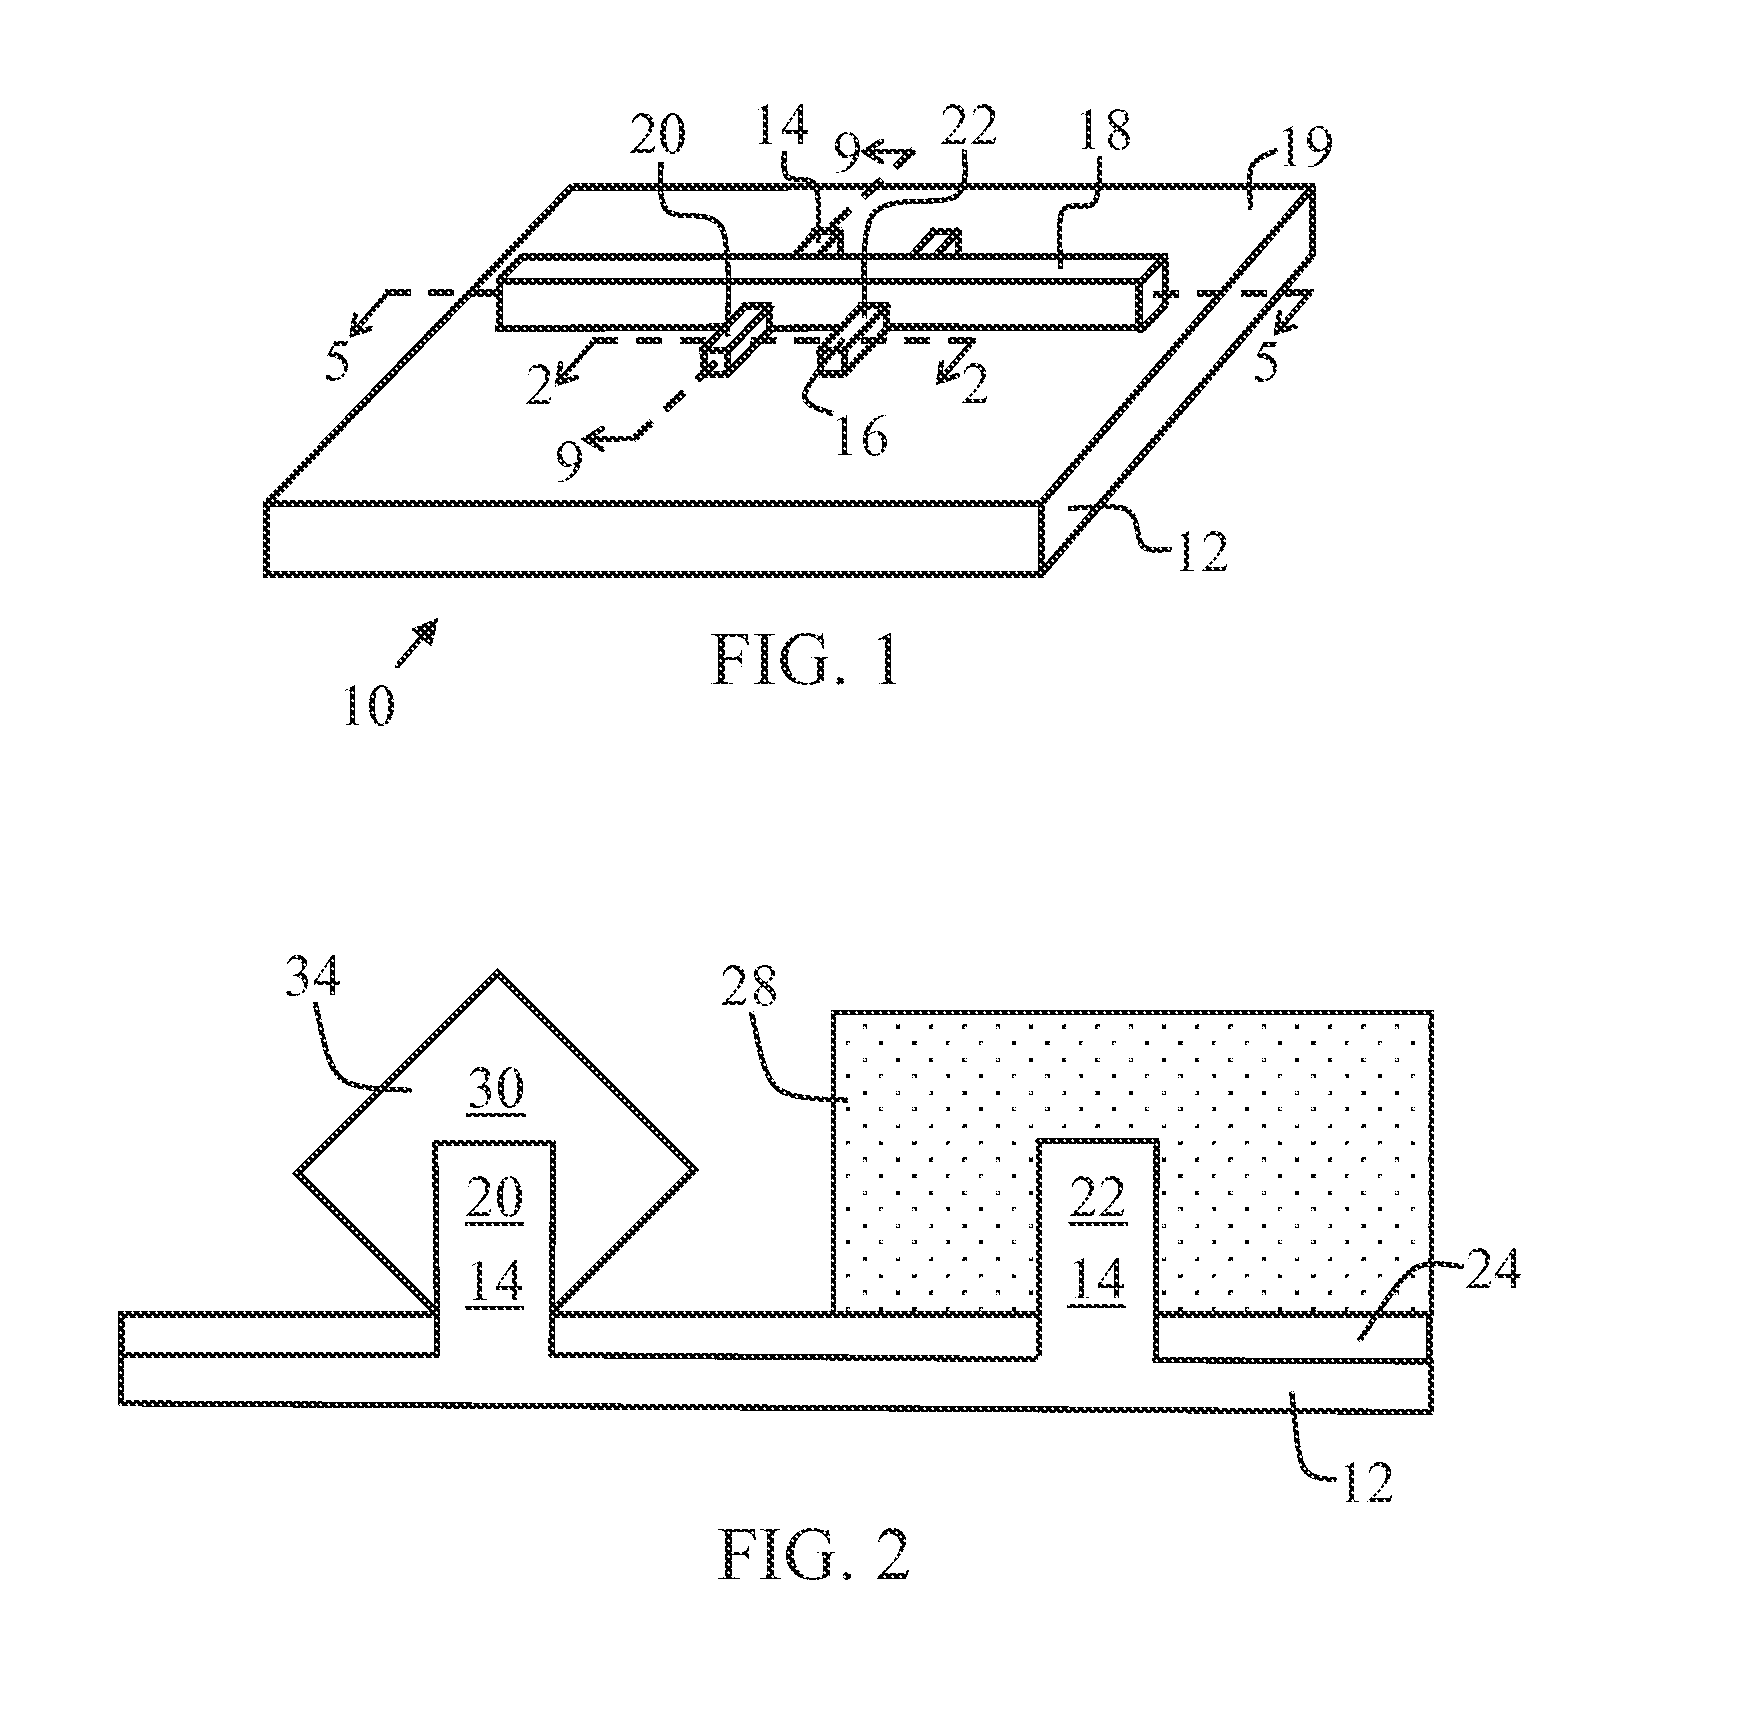 Integrated circuits with metal-insulator-semiconductor (MIS) contact structures and methods for fabricating same